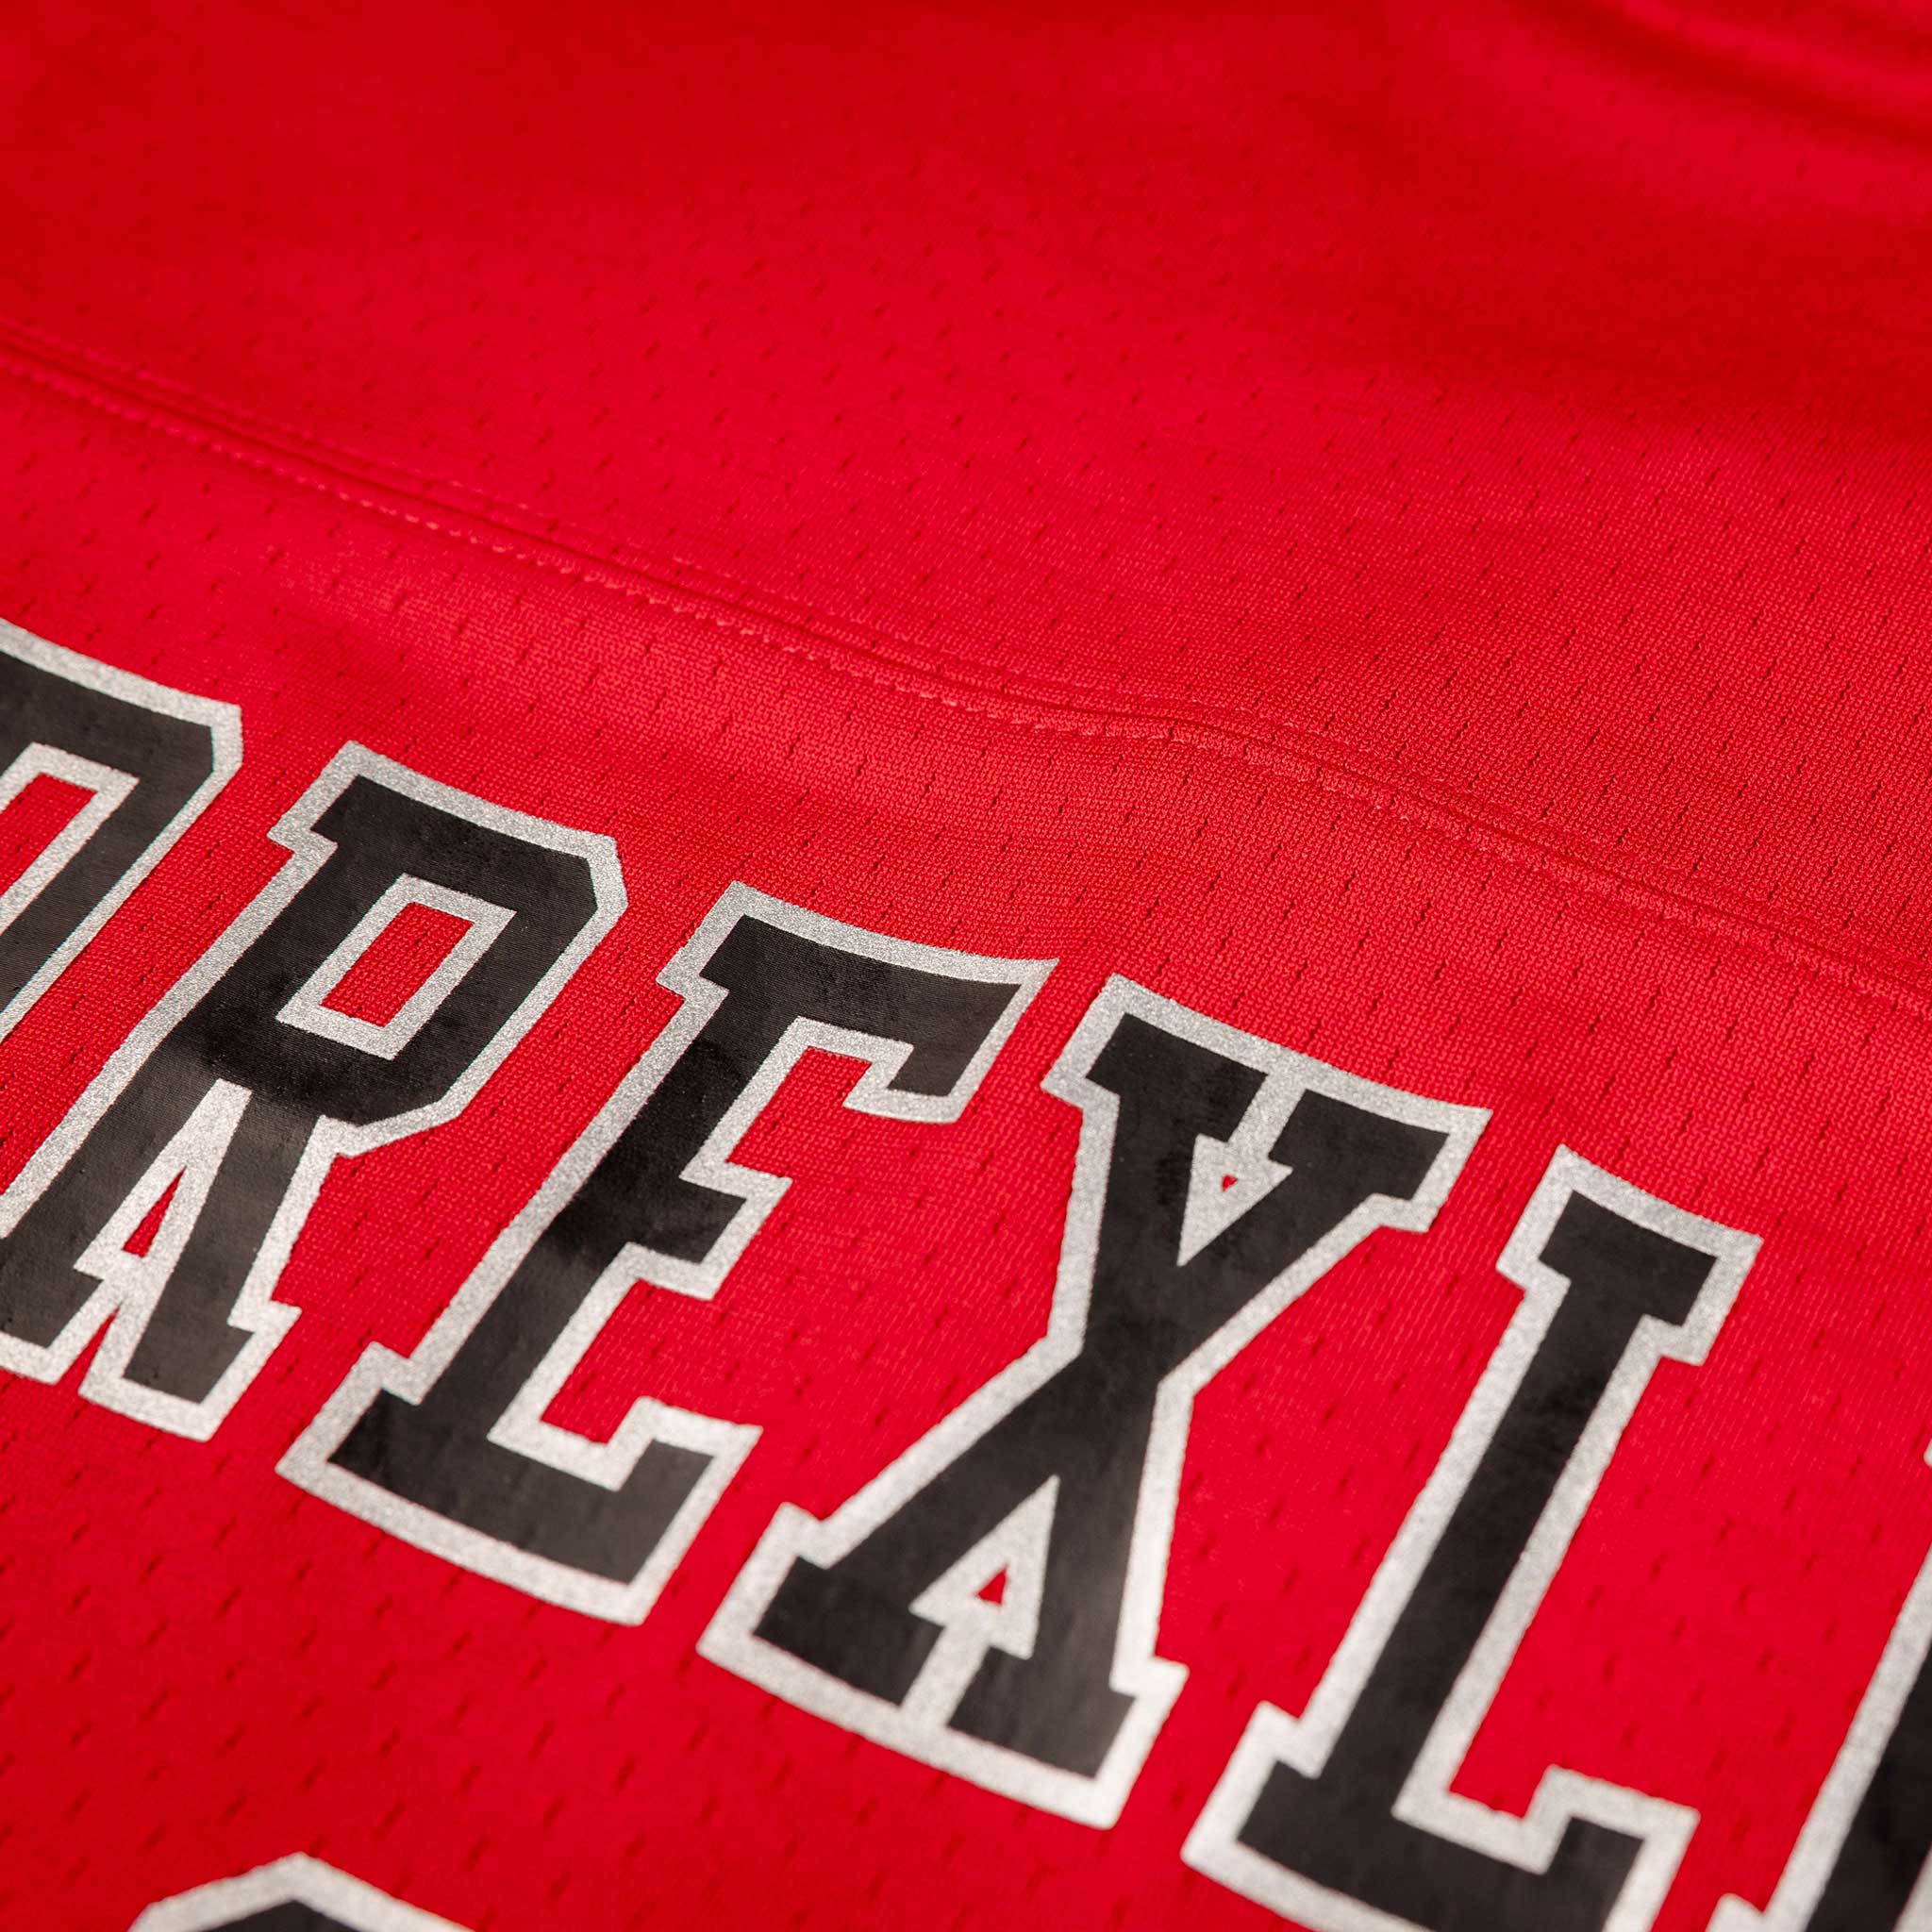 Mitchell & Ness Relive The Past with The Retro Drexler Women's Tee | Trail Blazers Gear M